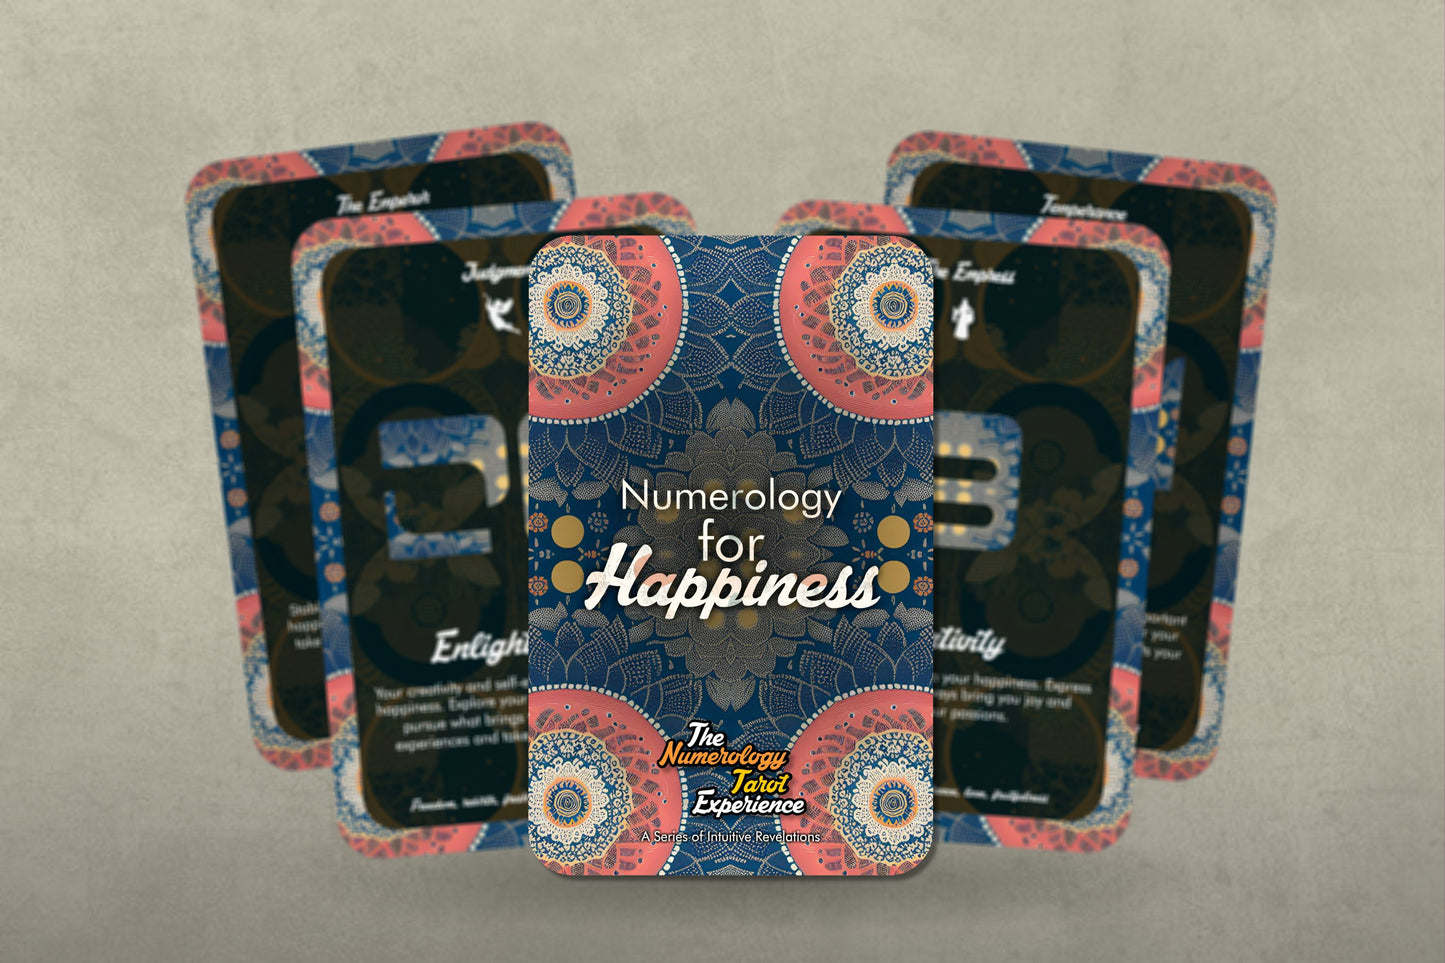 Numerology of Happiness - The Numerology Tarot Experience